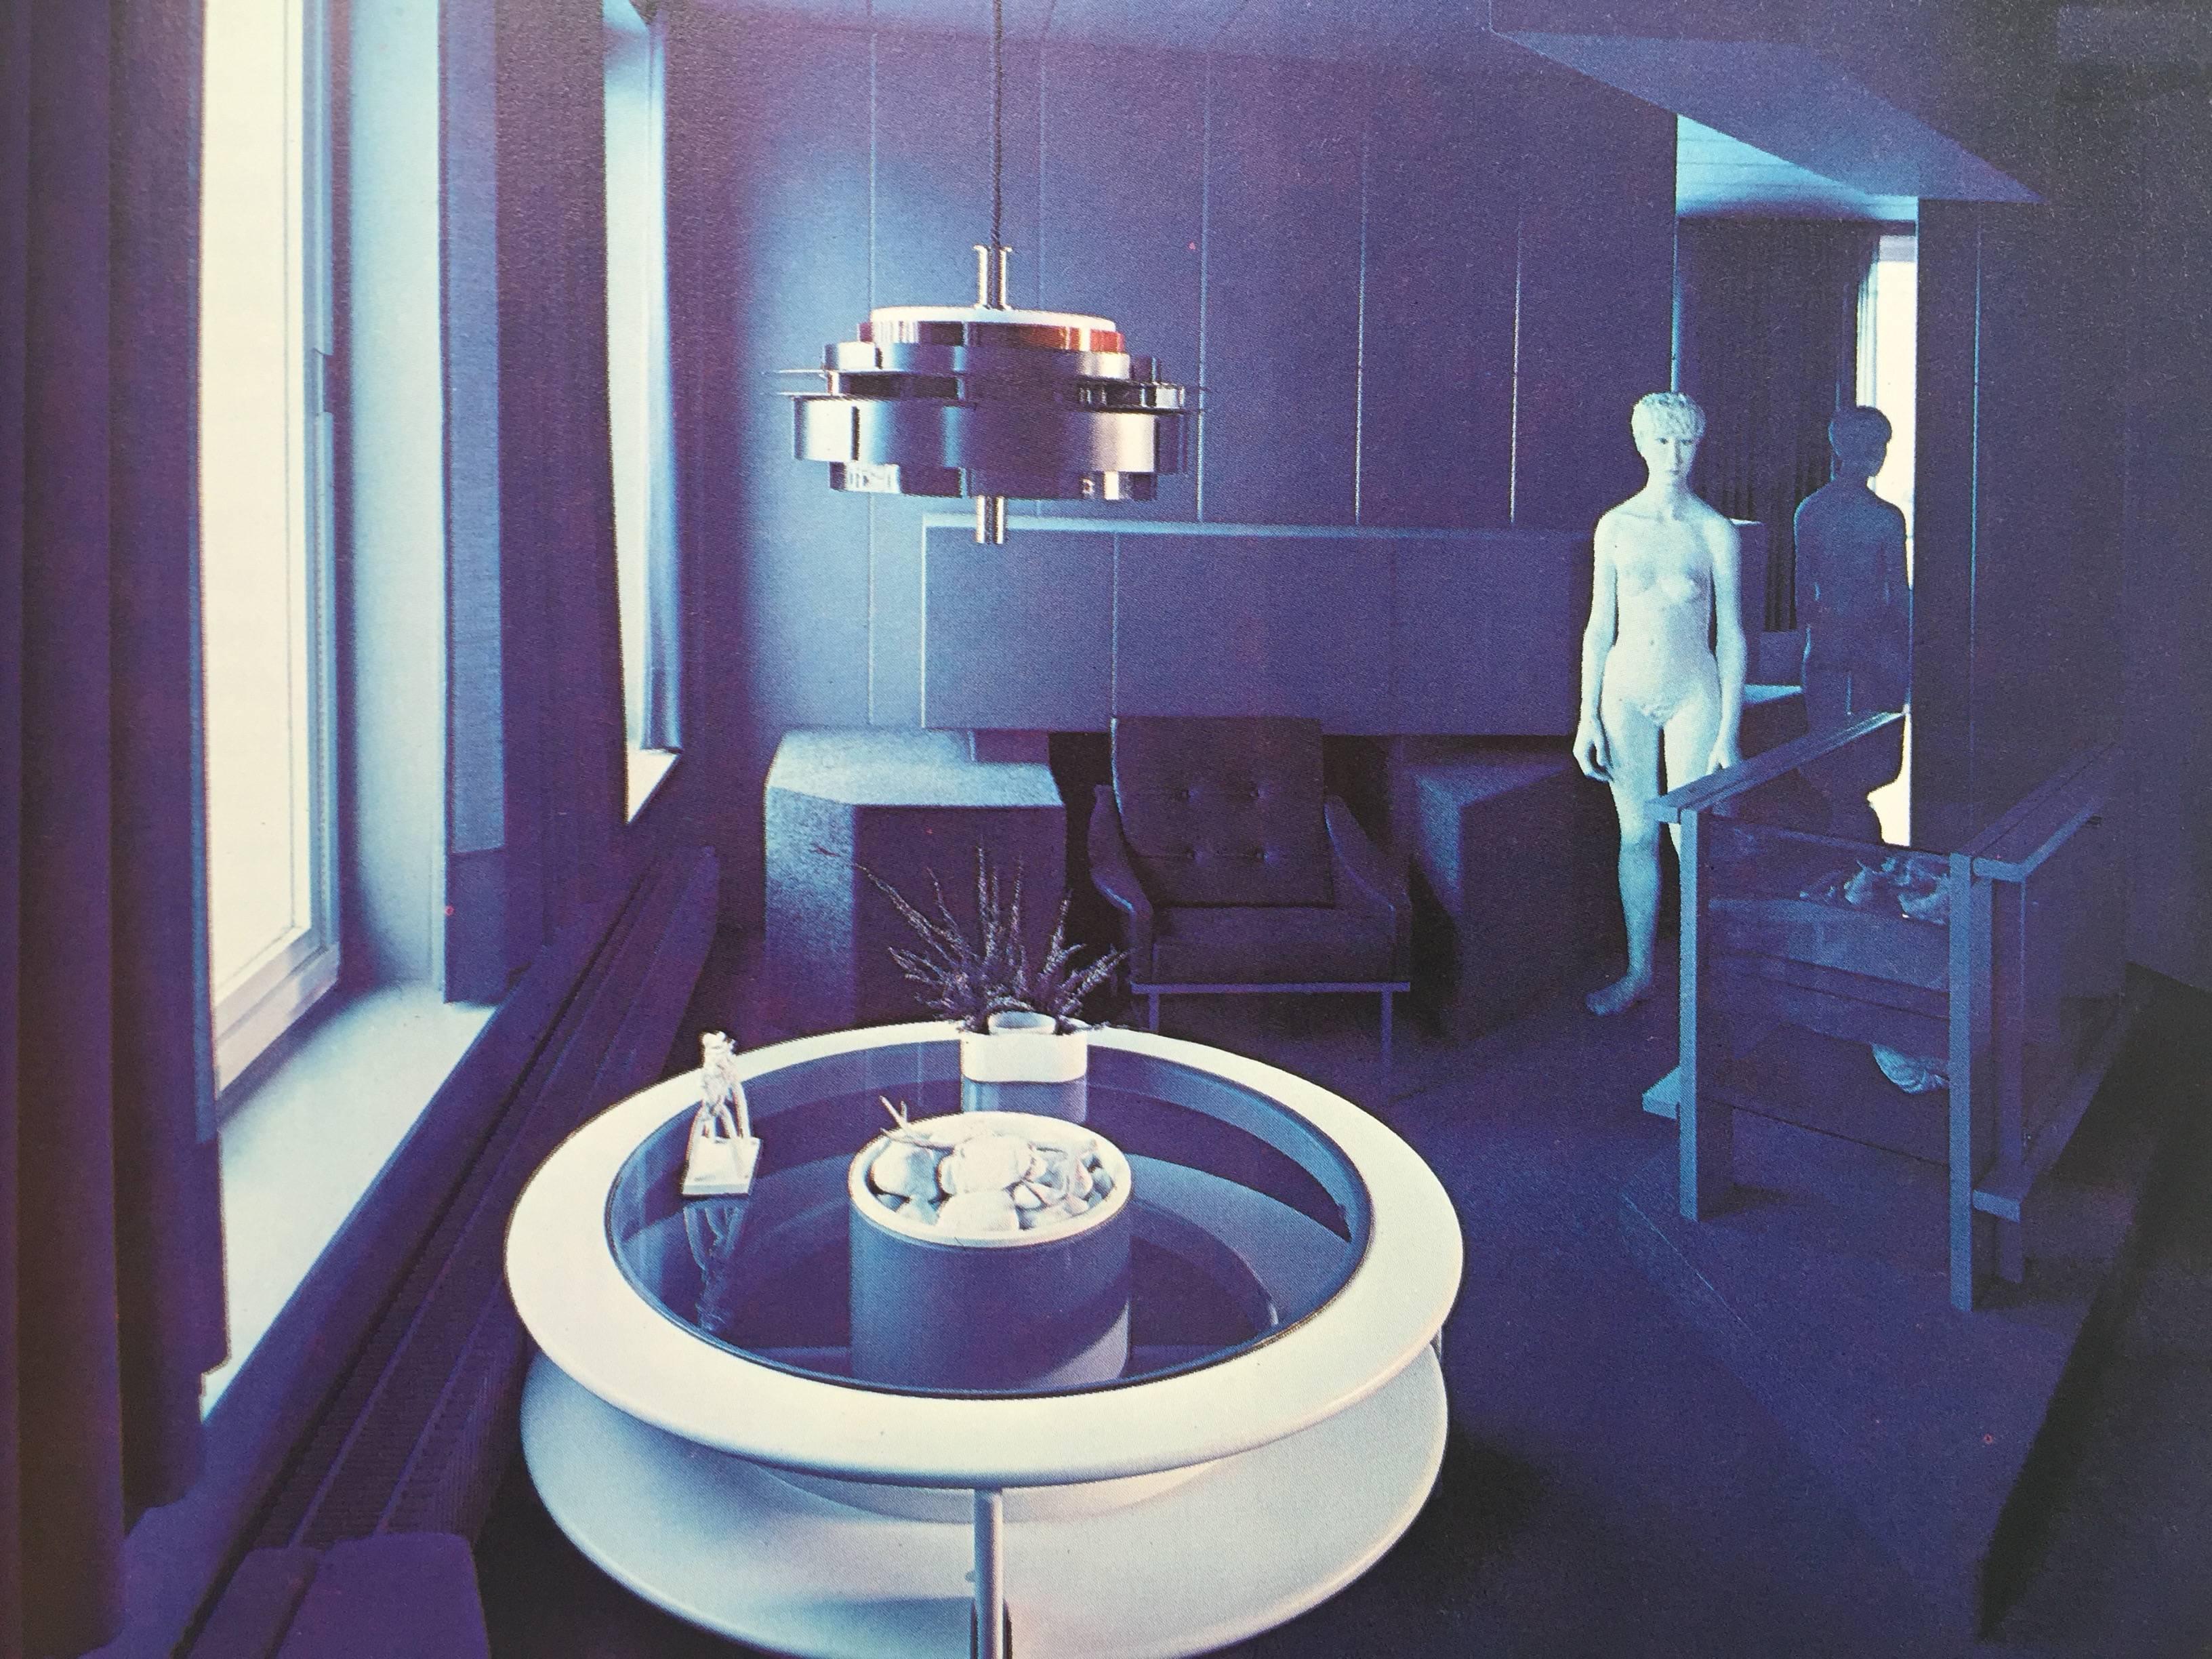 Decorative Art and Modern Interiors, Environments for People, 1980 2